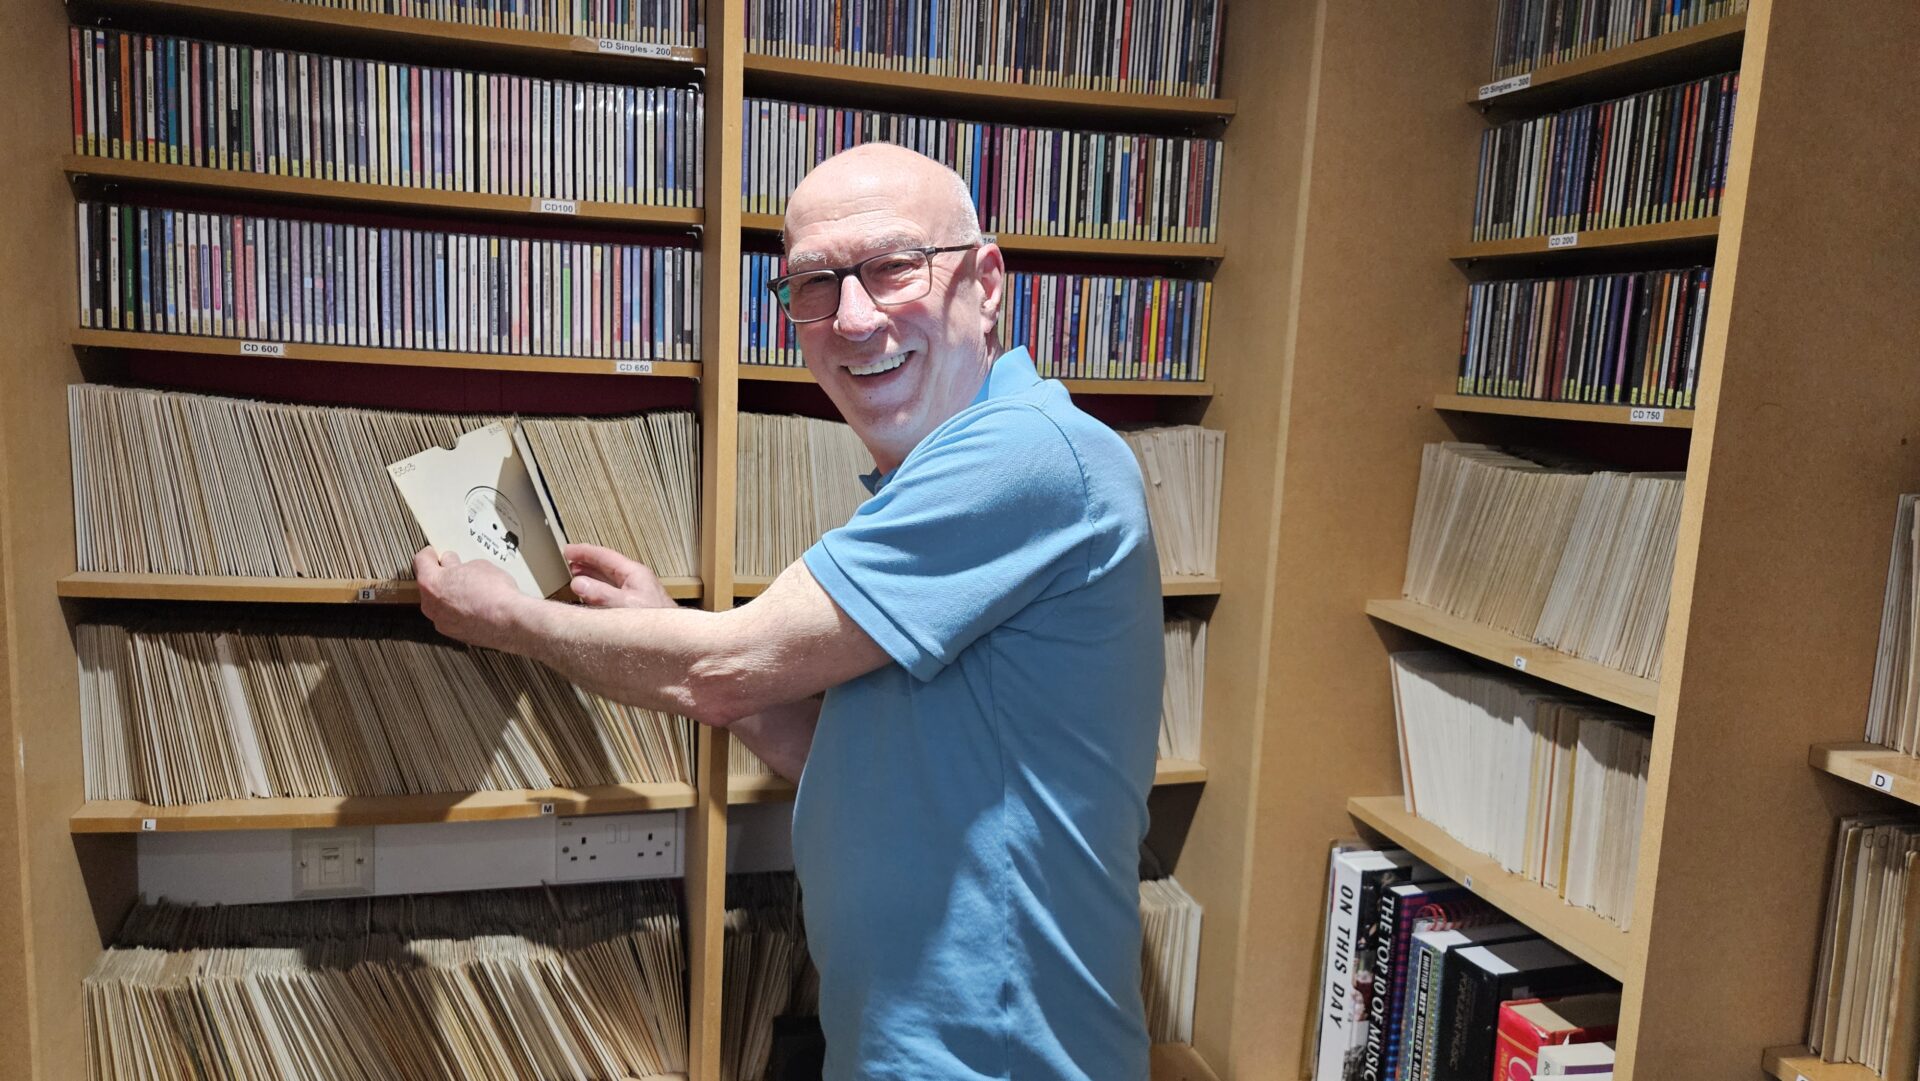 KEN BRUCE GOES BACK TO THE START TODAY